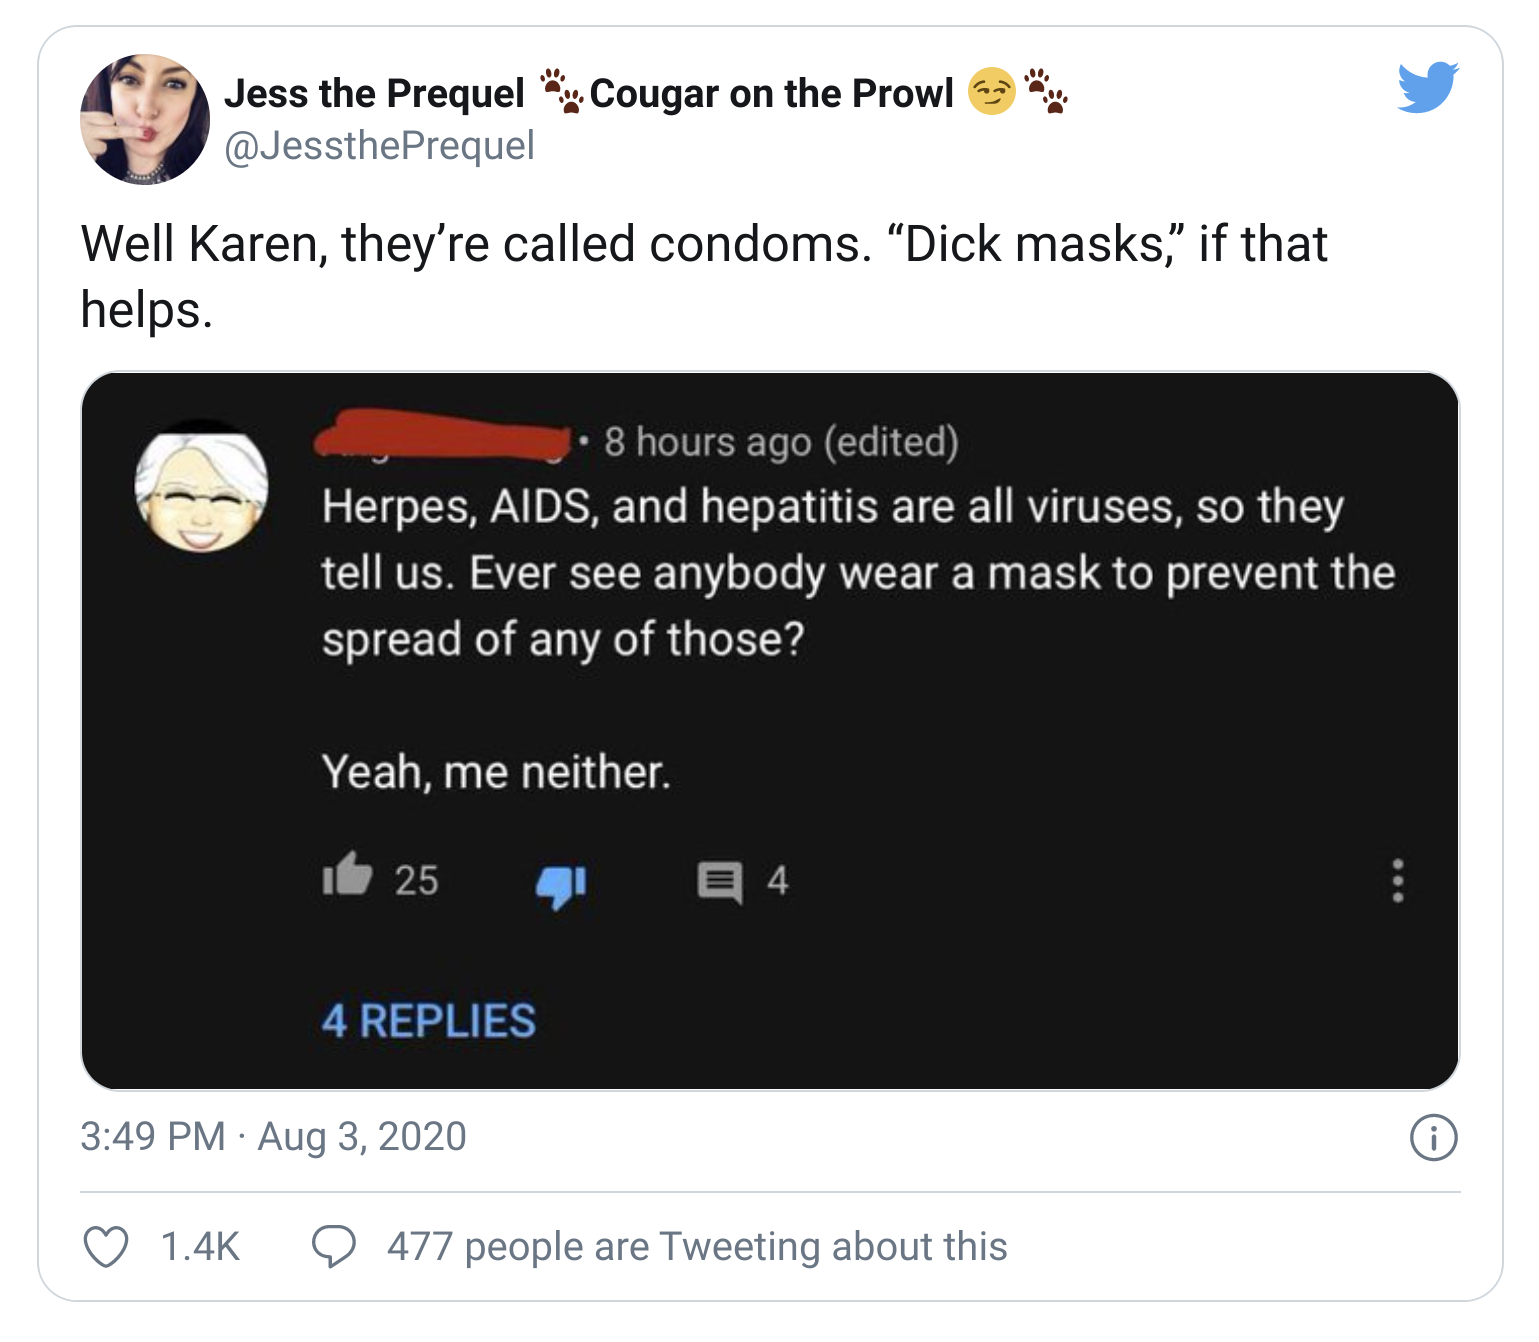 Internet meme - Jess the Prequel Cougar on the Prowl Well Karen, they're called condoms. "Dick masks," if that helps. 1. 8 hours ago edited Herpes, Aids, and hepatitis are all viruses, so they tell us. Ever see anybody wear a mask to prevent the spread of